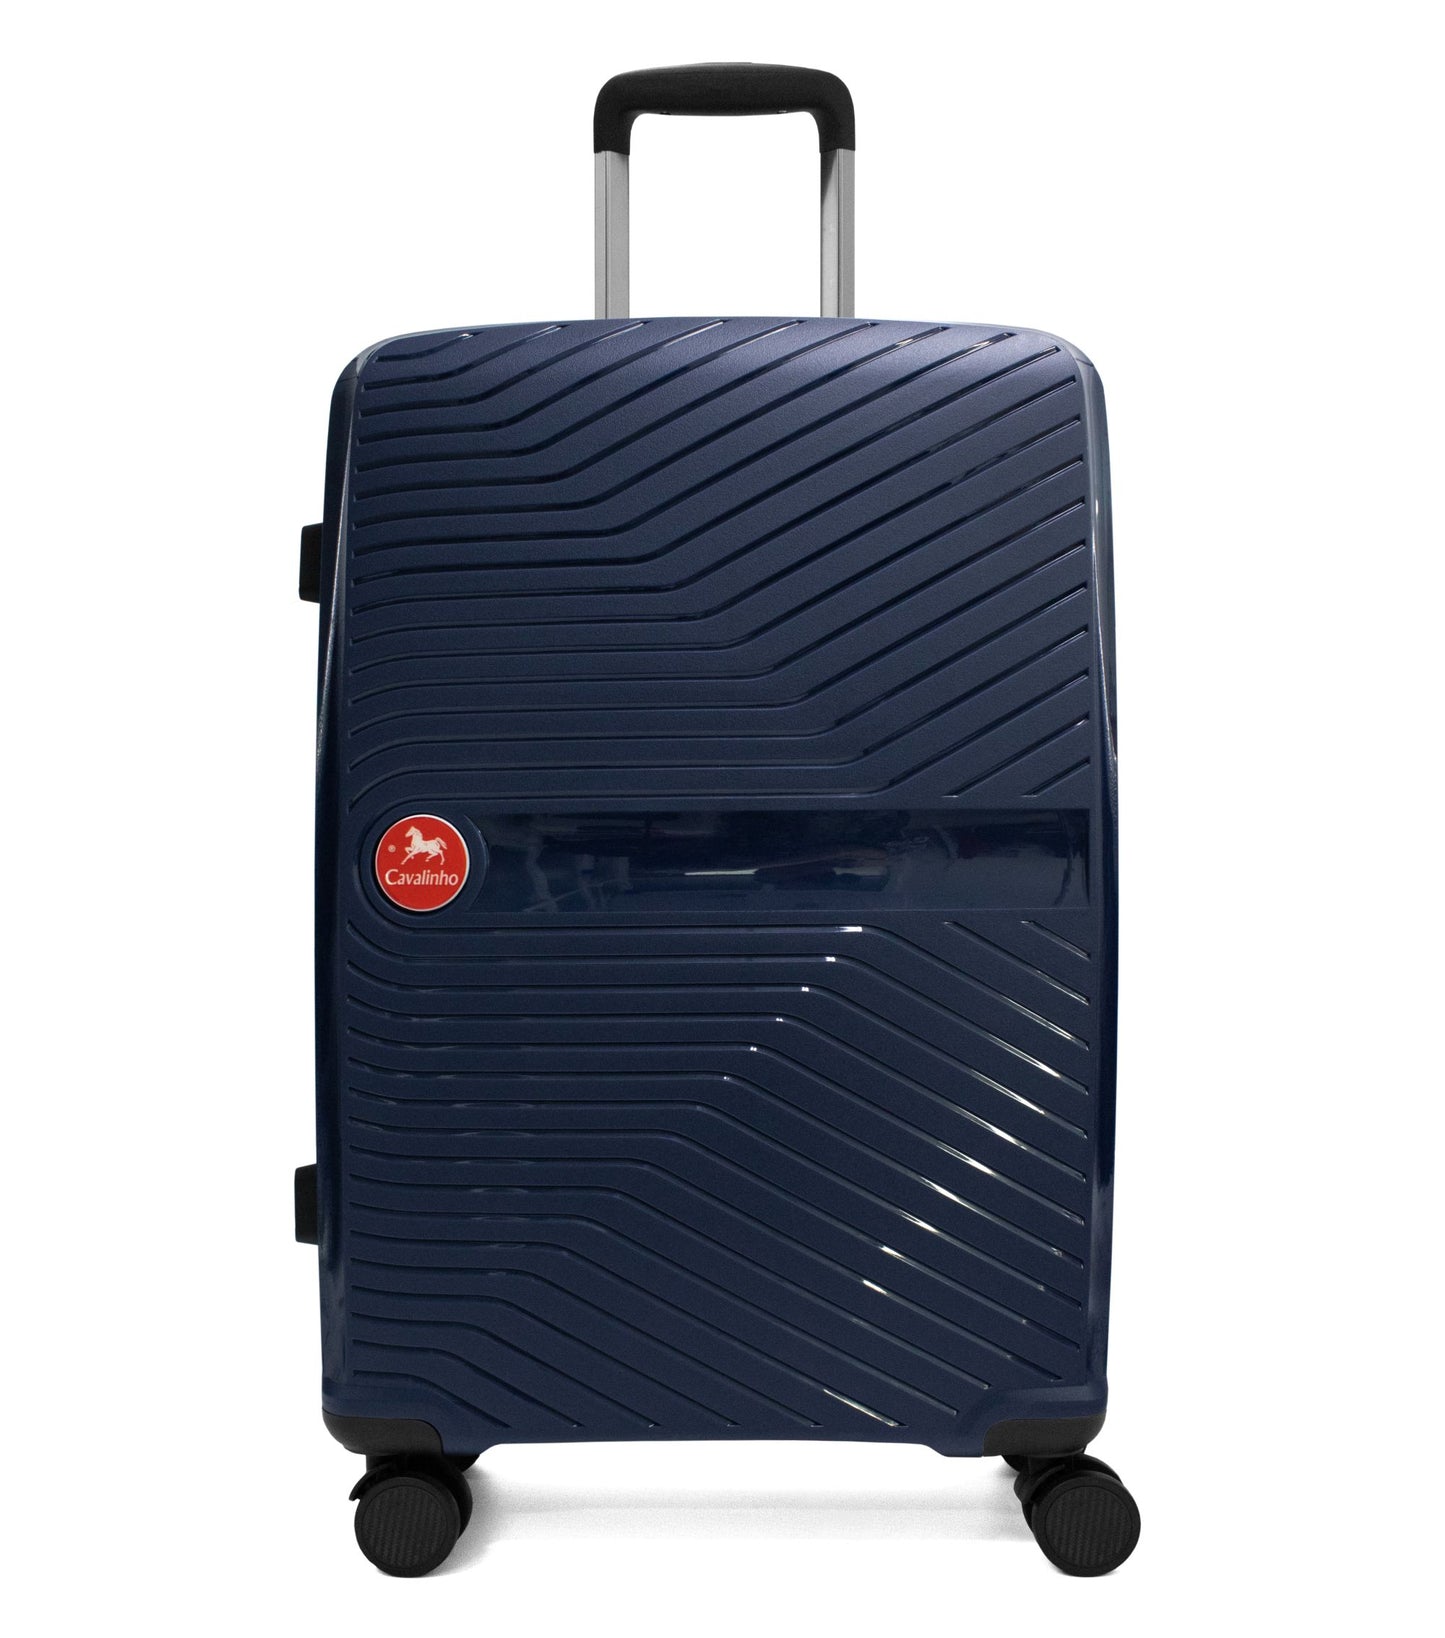 #color_ 24 inch Navy | Cavalinho Colorful Check-in Hardside Luggage (24") - 24 inch Navy - 68020004.03.24_1